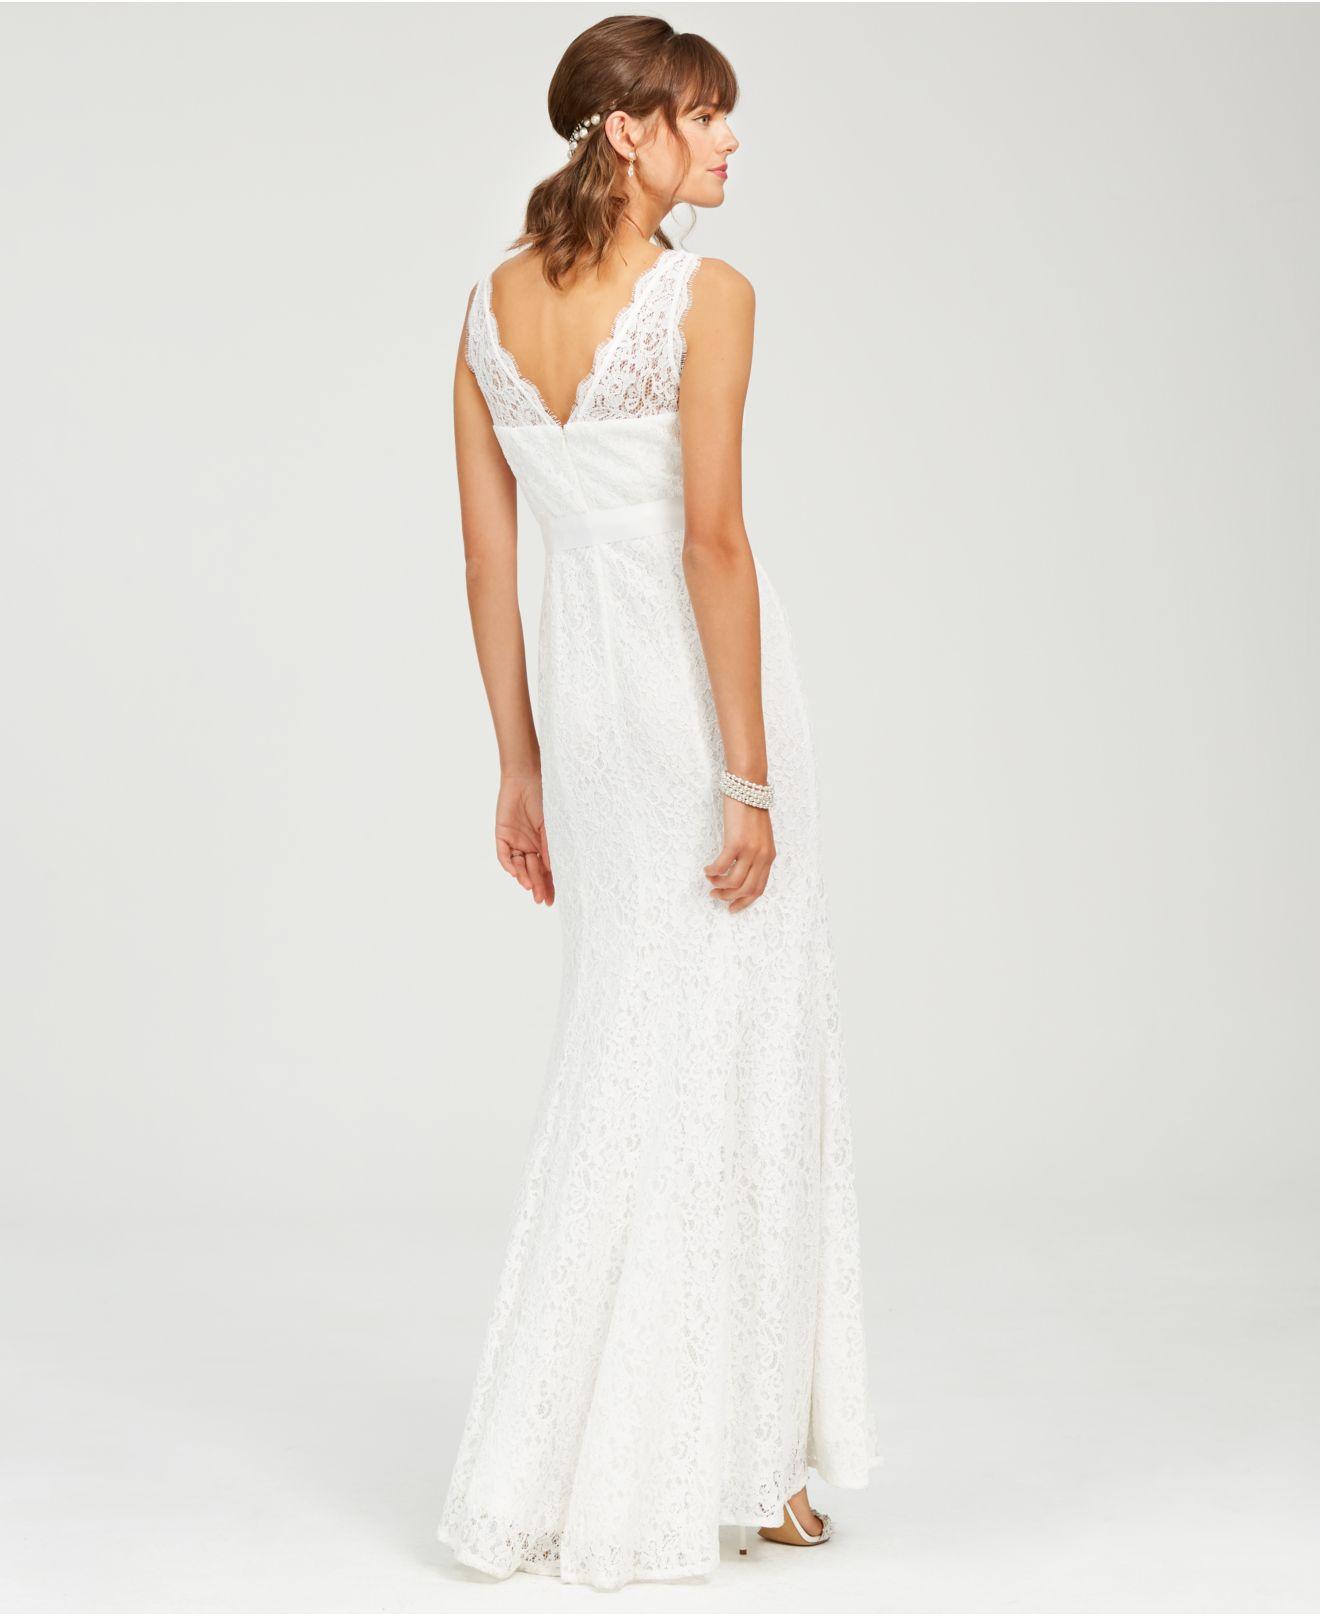 Adrianna Papell Lace V-neck Satin Sash Gown in Ivory (White) - Lyst